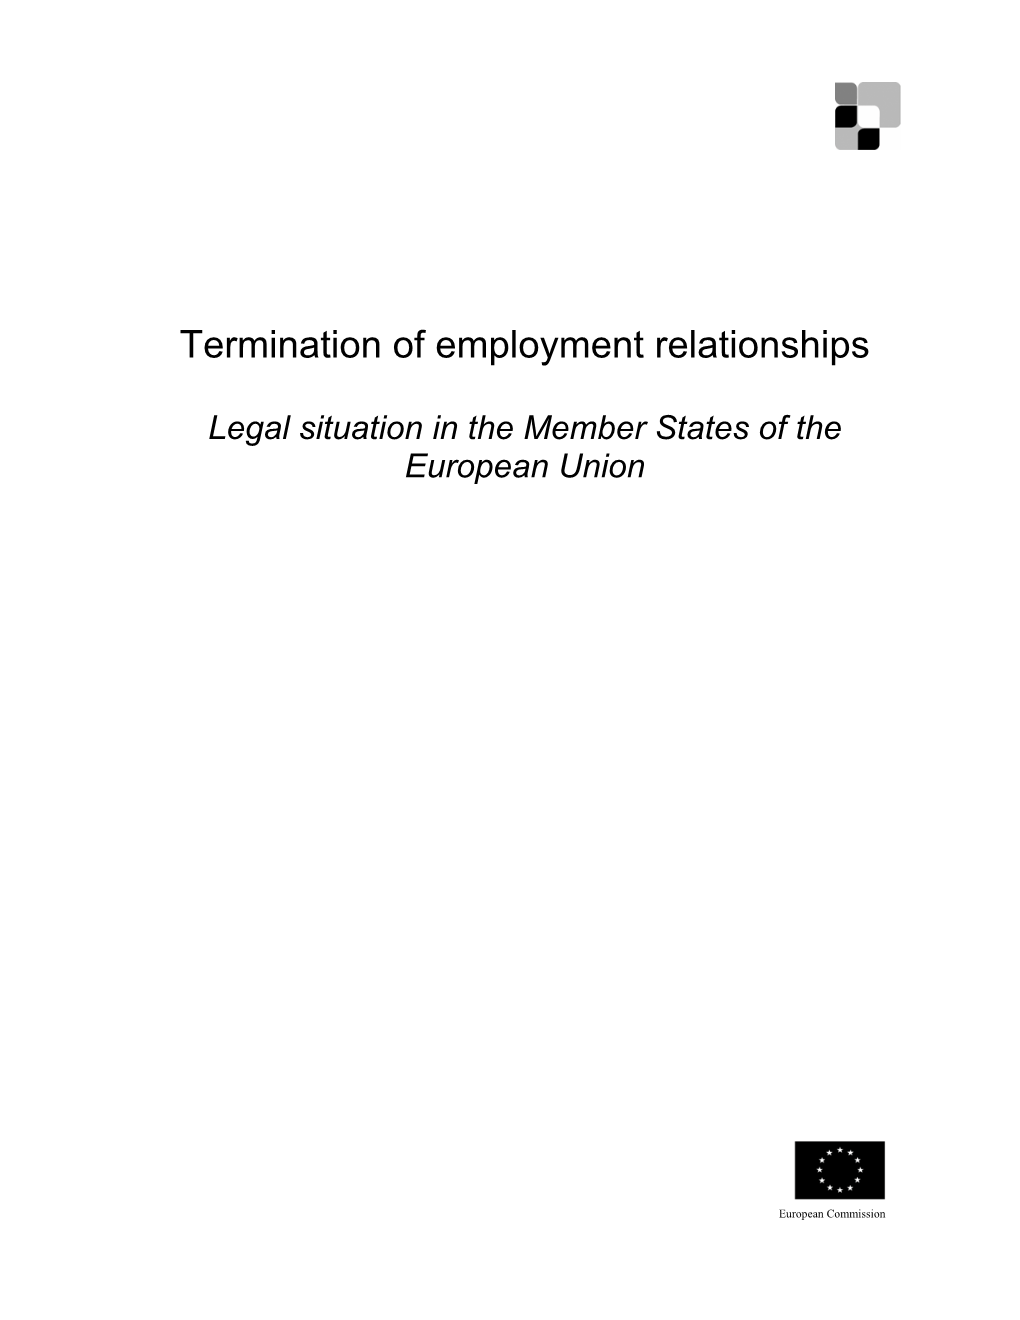 Termination of Employment Relationships